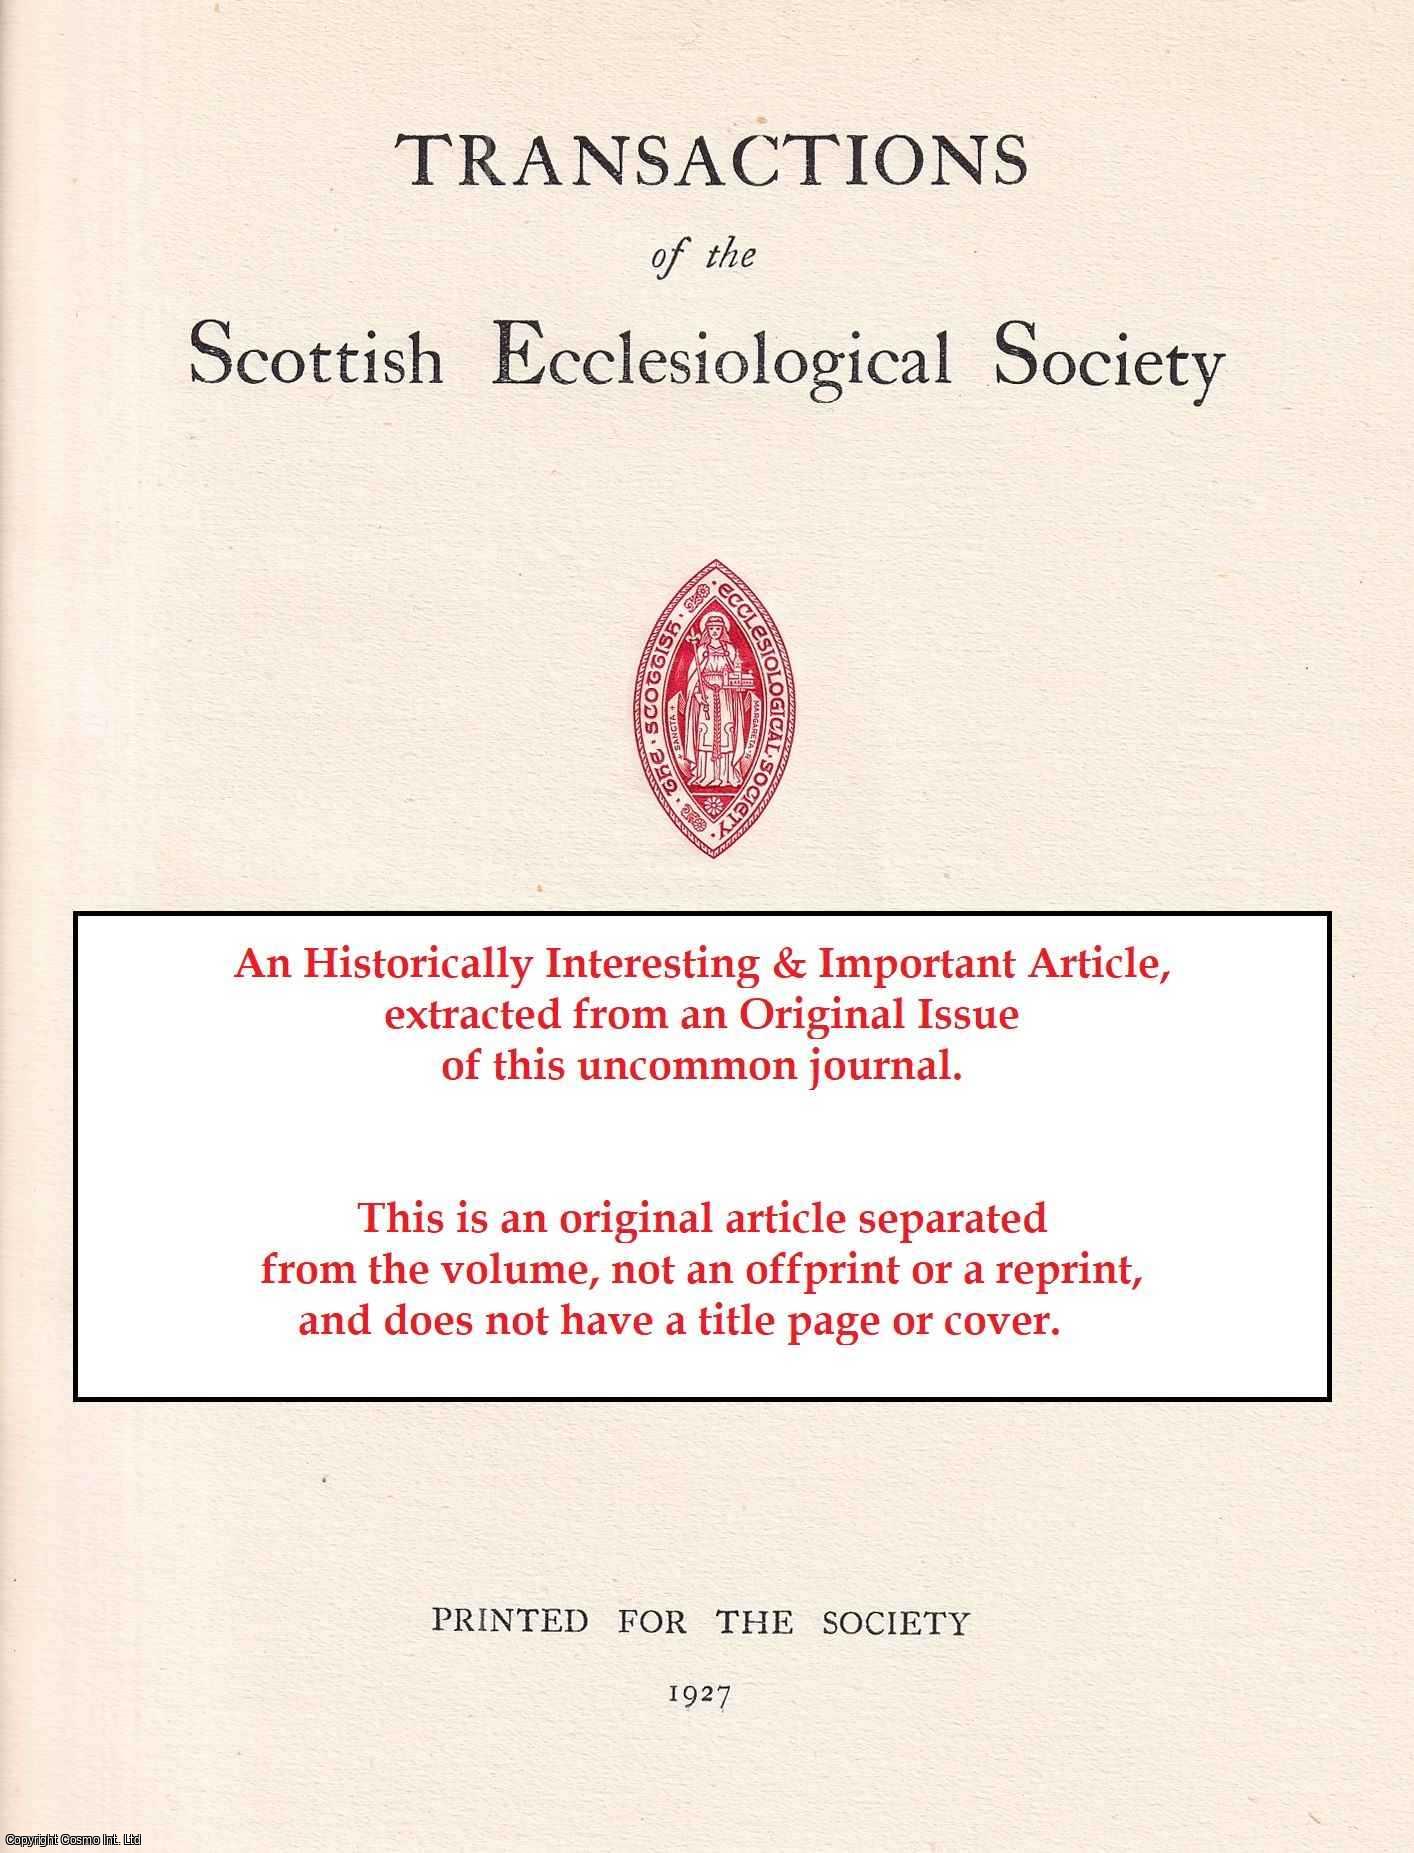 W.M. Mackenzie - Cromarty, Its Old Chapels and Parish Church. An original article from the Transactions of the Scottish Ecclesiological Society, 1905.